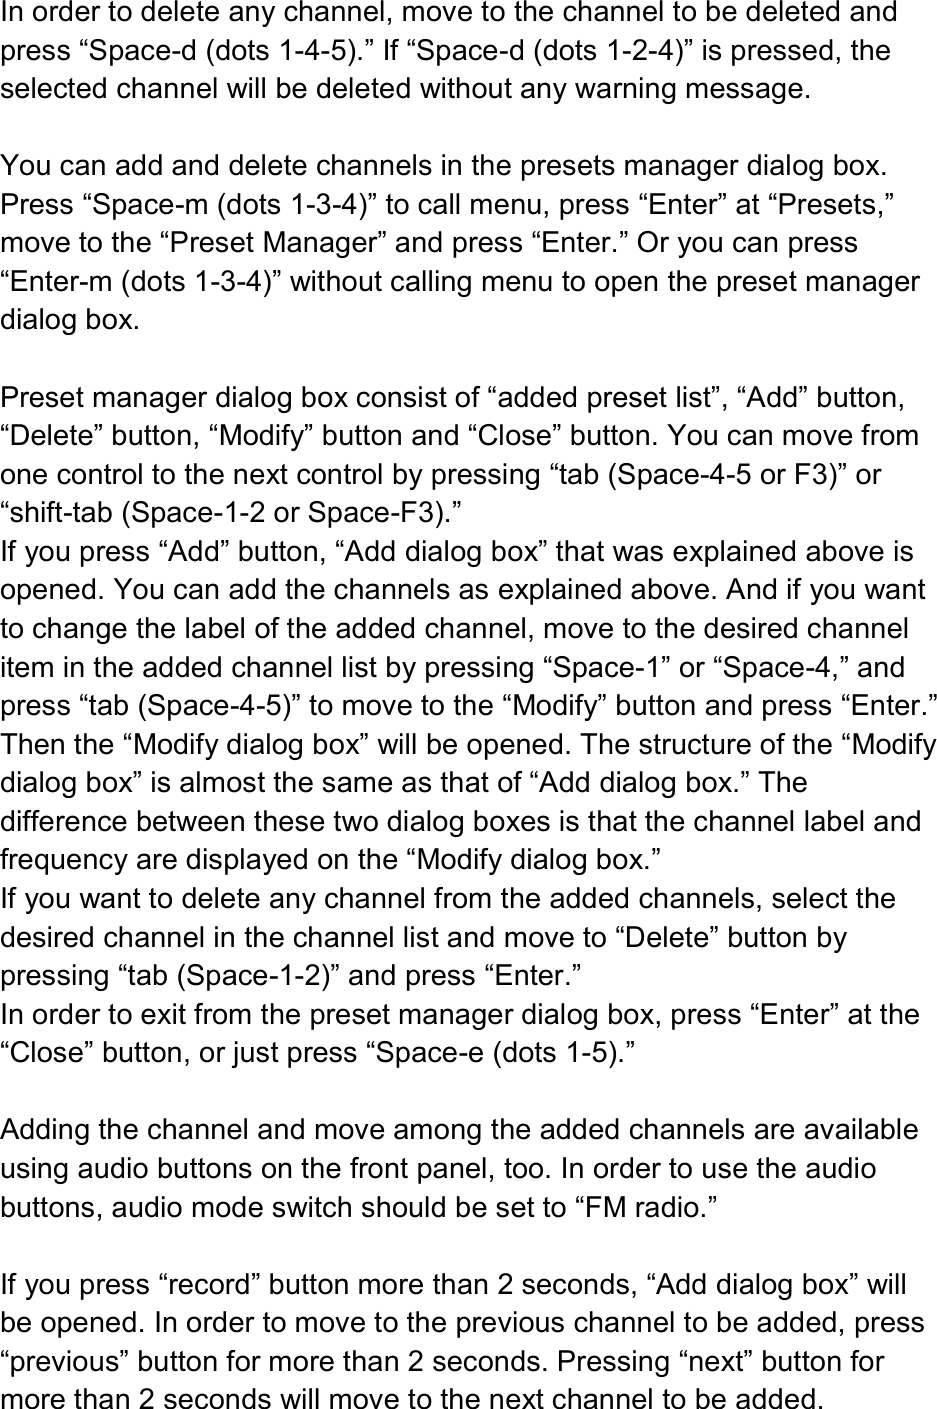  In order to delete any channel, move to the channel to be deleted and press “Space-d (dots 1-4-5).” If “Space-d (dots 1-2-4)” is pressed, the selected channel will be deleted without any warning message.  You can add and delete channels in the presets manager dialog box. Press “Space-m (dots 1-3-4)” to call menu, press “Enter” at “Presets,” move to the “Preset Manager” and press “Enter.” Or you can press “Enter-m (dots 1-3-4)” without calling menu to open the preset manager dialog box.  Preset manager dialog box consist of “added preset list”, “Add” button, “Delete” button, “Modify” button and “Close” button. You can move from one control to the next control by pressing “tab (Space-4-5 or F3)” or “shift-tab (Space-1-2 or Space-F3).” If you press “Add” button, “Add dialog box” that was explained above is opened. You can add the channels as explained above. And if you want to change the label of the added channel, move to the desired channel item in the added channel list by pressing “Space-1” or “Space-4,” and press “tab (Space-4-5)” to move to the “Modify” button and press “Enter.” Then the “Modify dialog box” will be opened. The structure of the “Modify dialog box” is almost the same as that of “Add dialog box.” The difference between these two dialog boxes is that the channel label and frequency are displayed on the “Modify dialog box.”   If you want to delete any channel from the added channels, select the desired channel in the channel list and move to “Delete” button by pressing “tab (Space-1-2)” and press “Enter.” In order to exit from the preset manager dialog box, press “Enter” at the “Close” button, or just press “Space-e (dots 1-5).”  Adding the channel and move among the added channels are available using audio buttons on the front panel, too. In order to use the audio buttons, audio mode switch should be set to “FM radio.”  If you press “record” button more than 2 seconds, “Add dialog box” will be opened. In order to move to the previous channel to be added, press “previous” button for more than 2 seconds. Pressing “next” button for more than 2 seconds will move to the next channel to be added. 